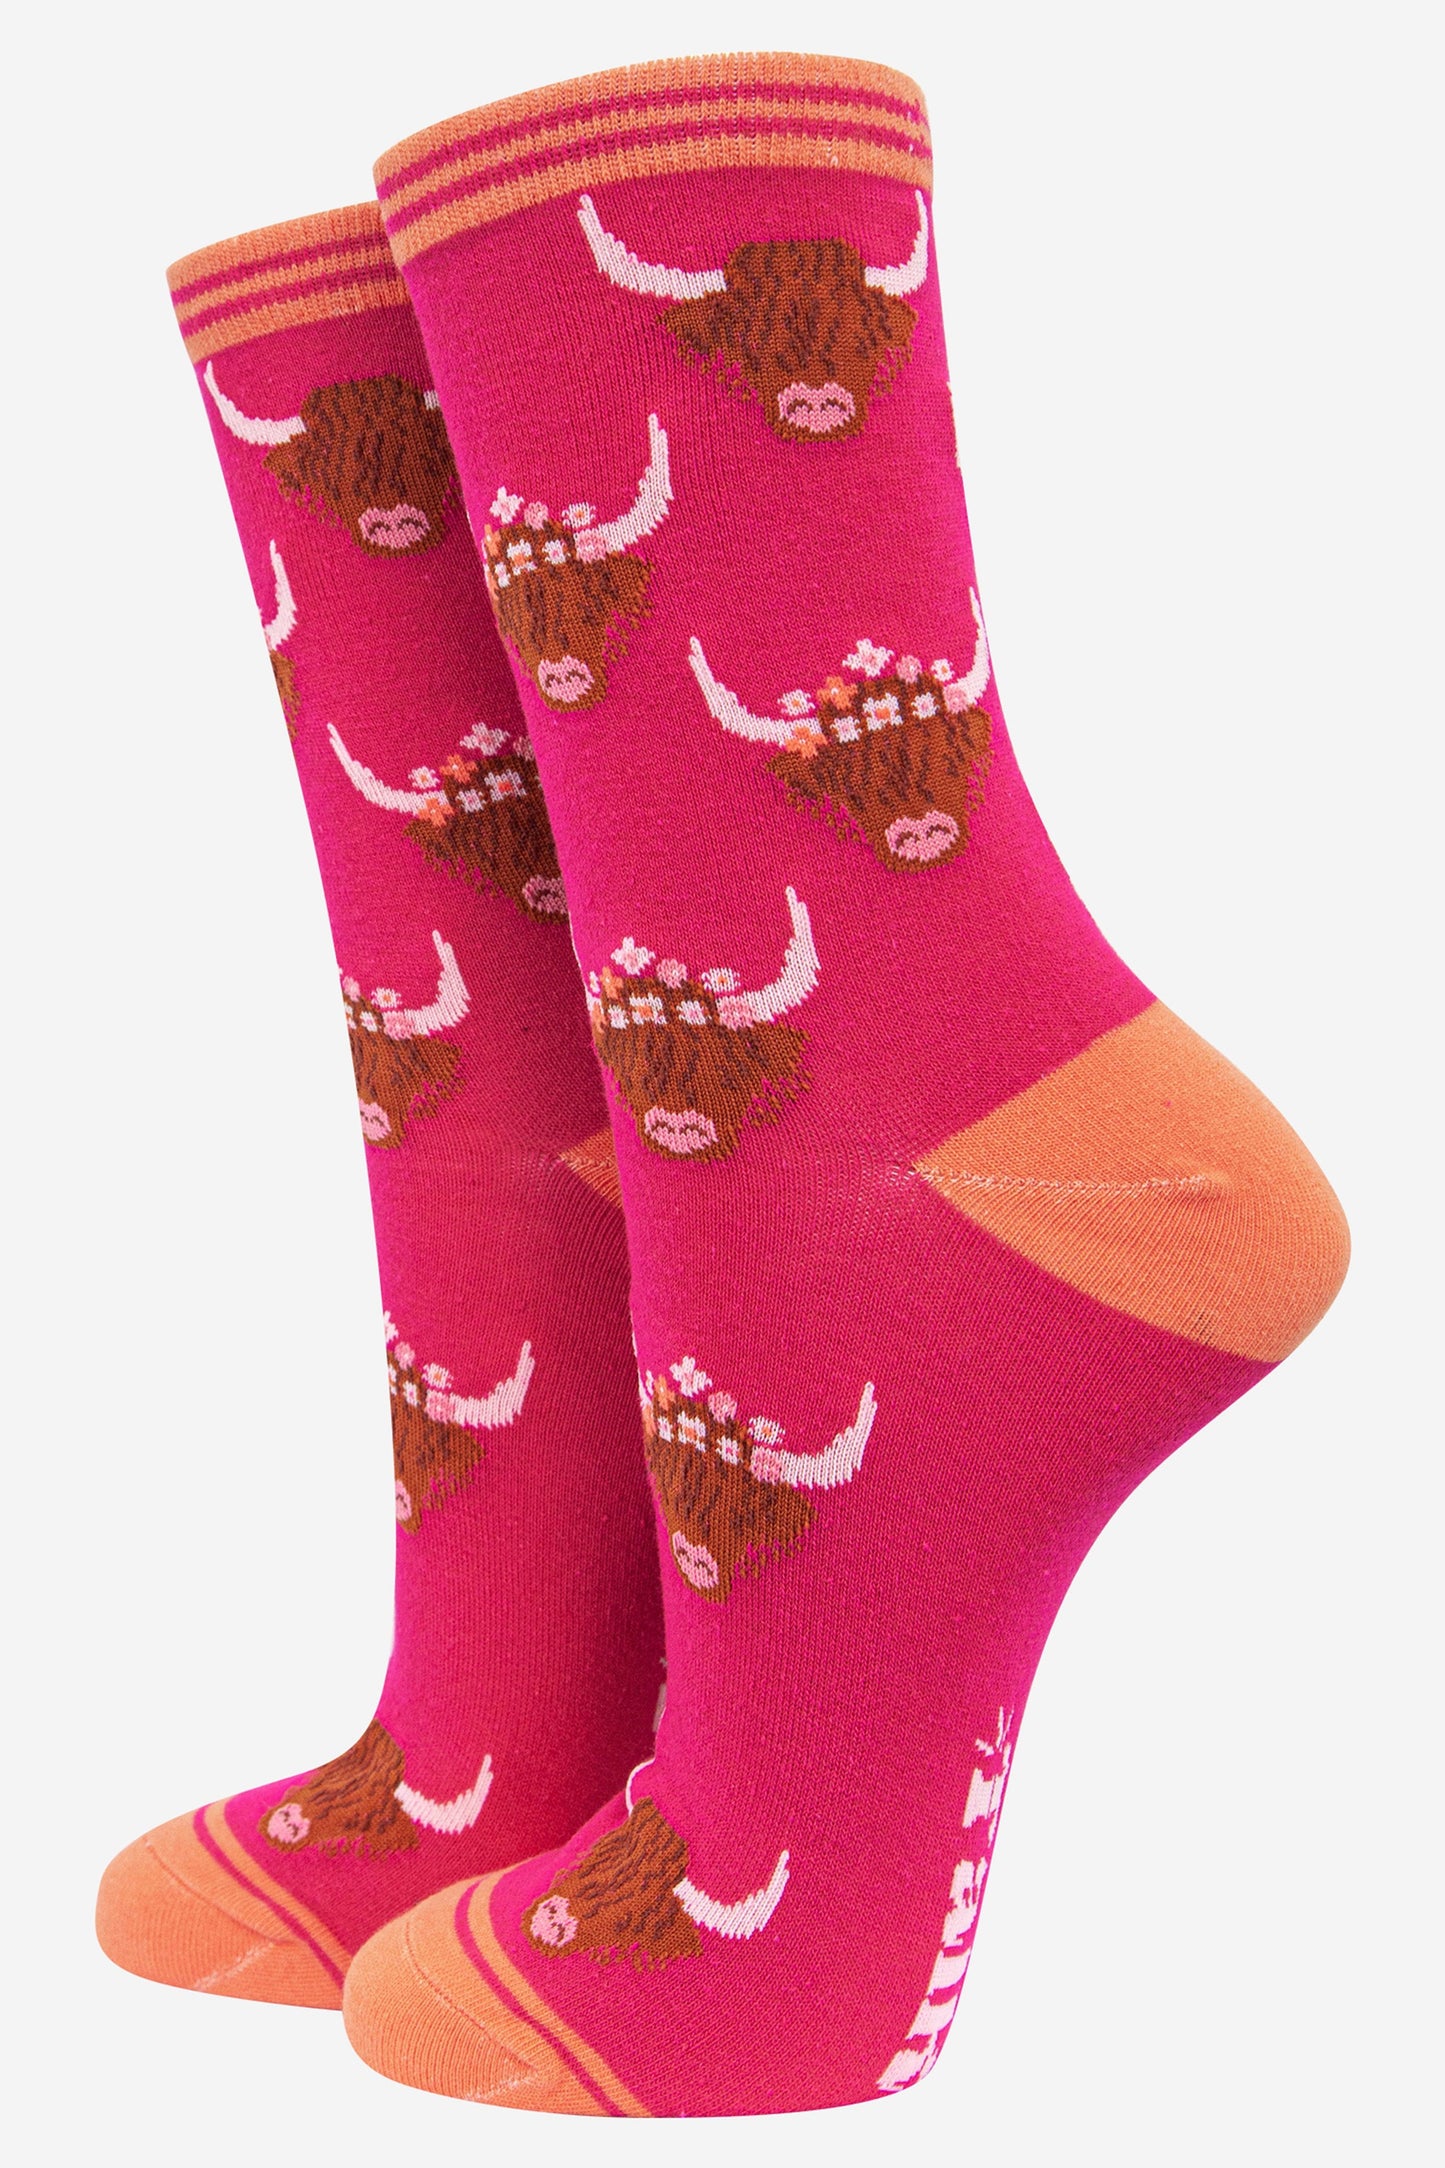 fuchsia pink bamboo socks with coral heel, toe and trim with an all over pattern of brown highland cow faces with horns the cows are wearing floral wreaths as crowns